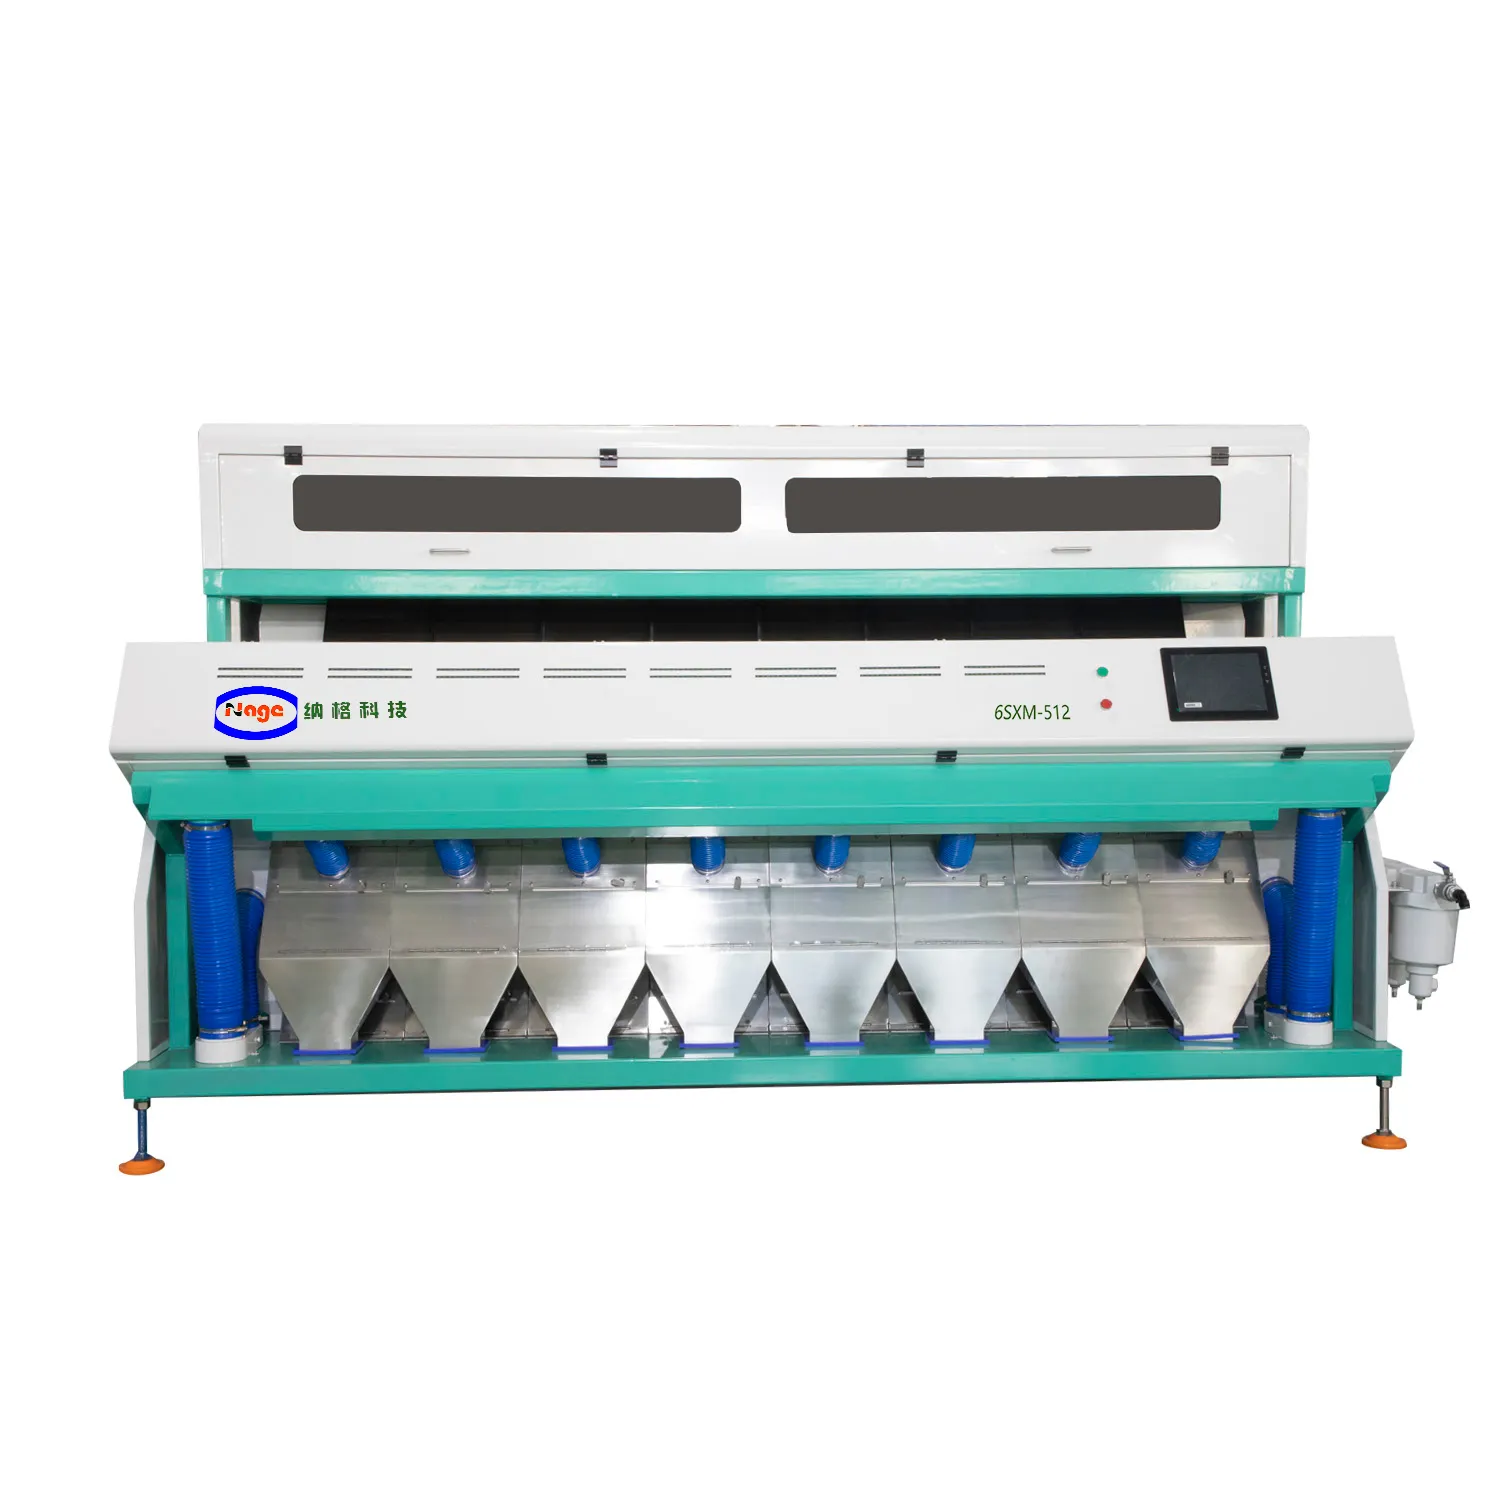 8 chutes 512 channels intelligent color sorting machine for India cardamom with best price